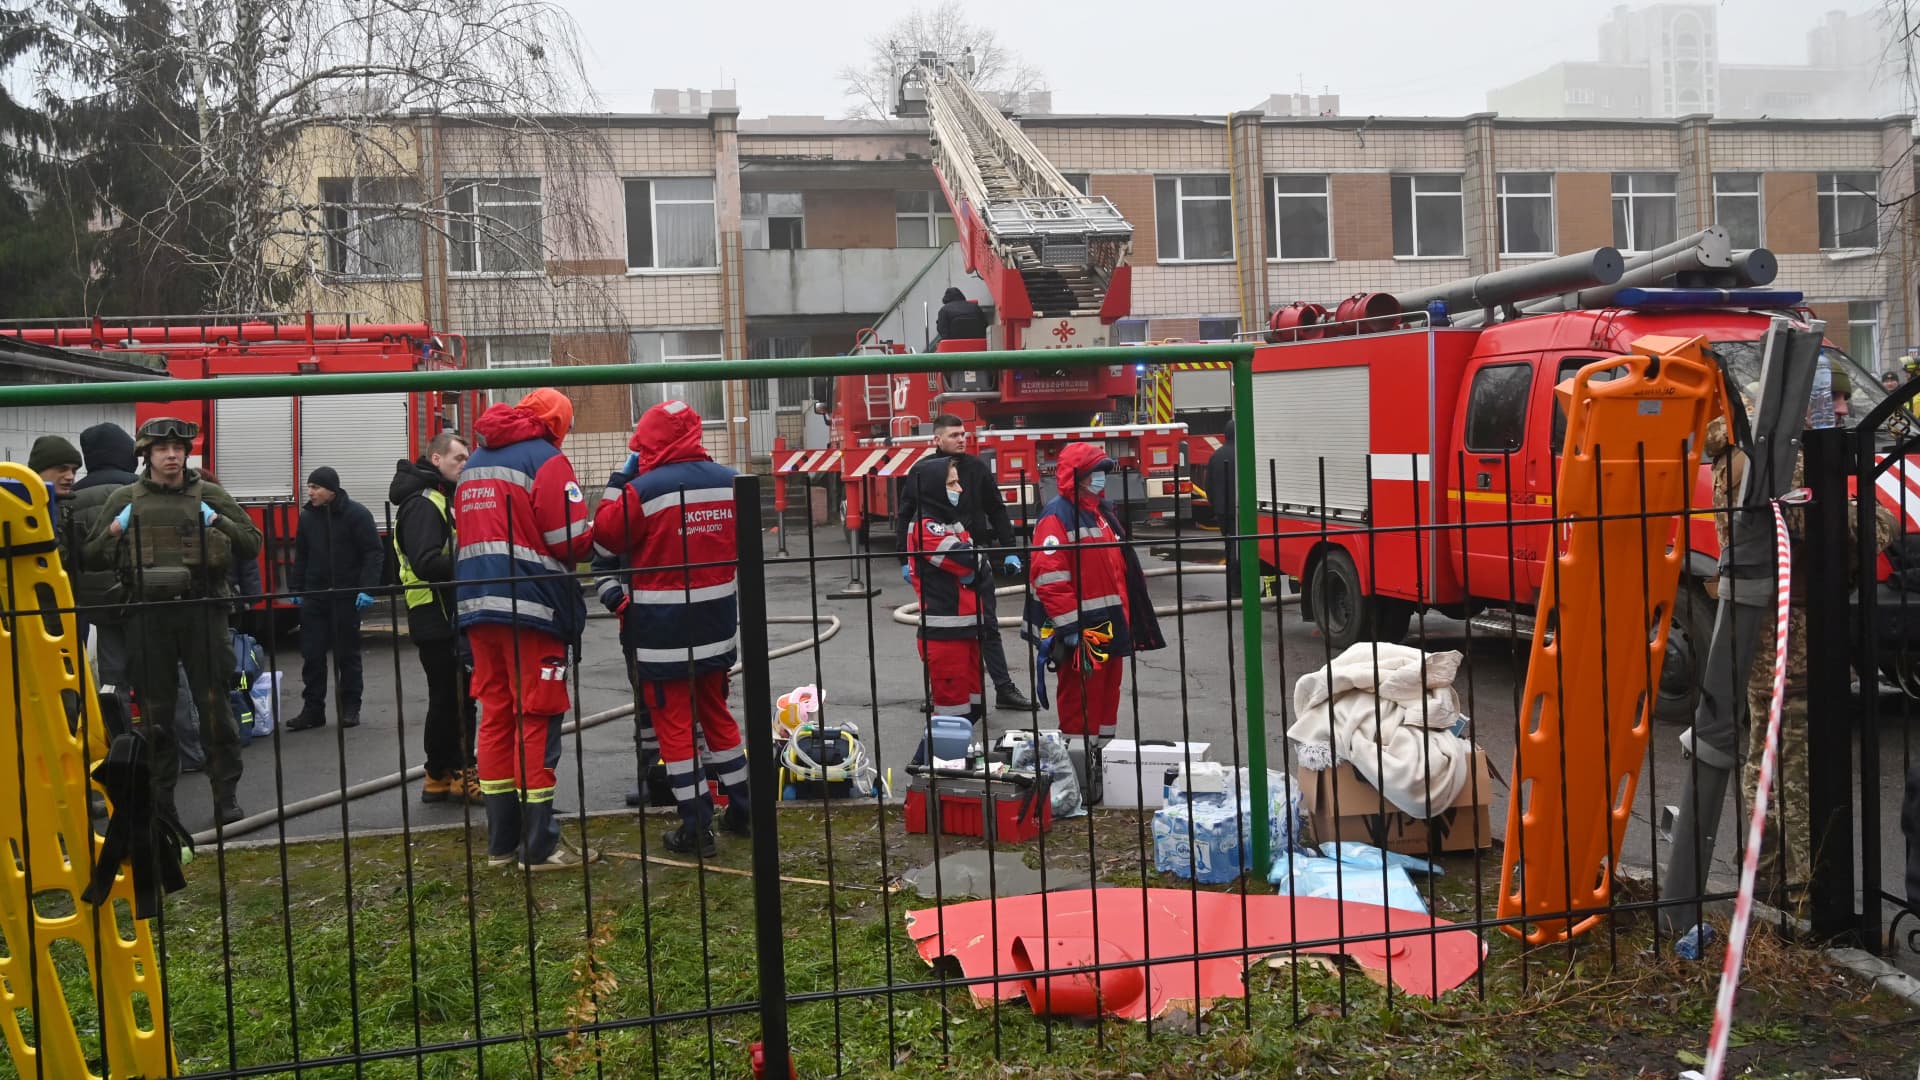 Rescue teams work near the site where a helicopter crashed near a kindergarten outside the capital Kyiv, killing 18 people, including three children and Ukrainian interior minister, on January 18, 2023.